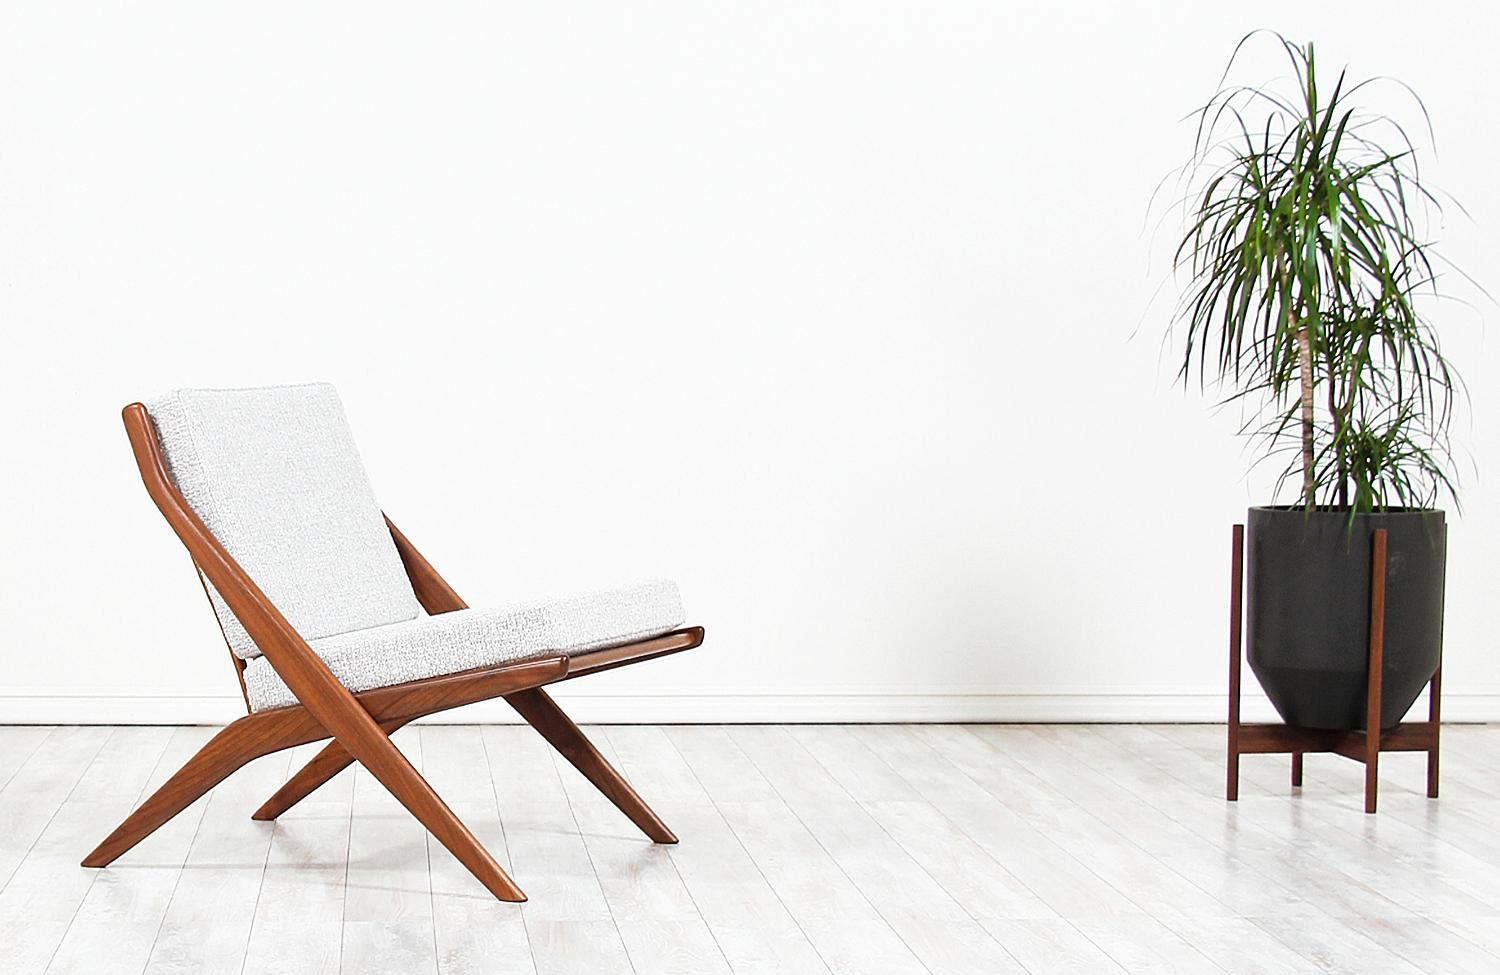 Elegant modern lounge chair designed in Sweden by Folke Ohlsson for DUX of Sweden, circa 1950s. This Minimalist lounge chair features a solid walnut wood frame with new high-density foam cushions and light-colored tweed fabric upholstery. This